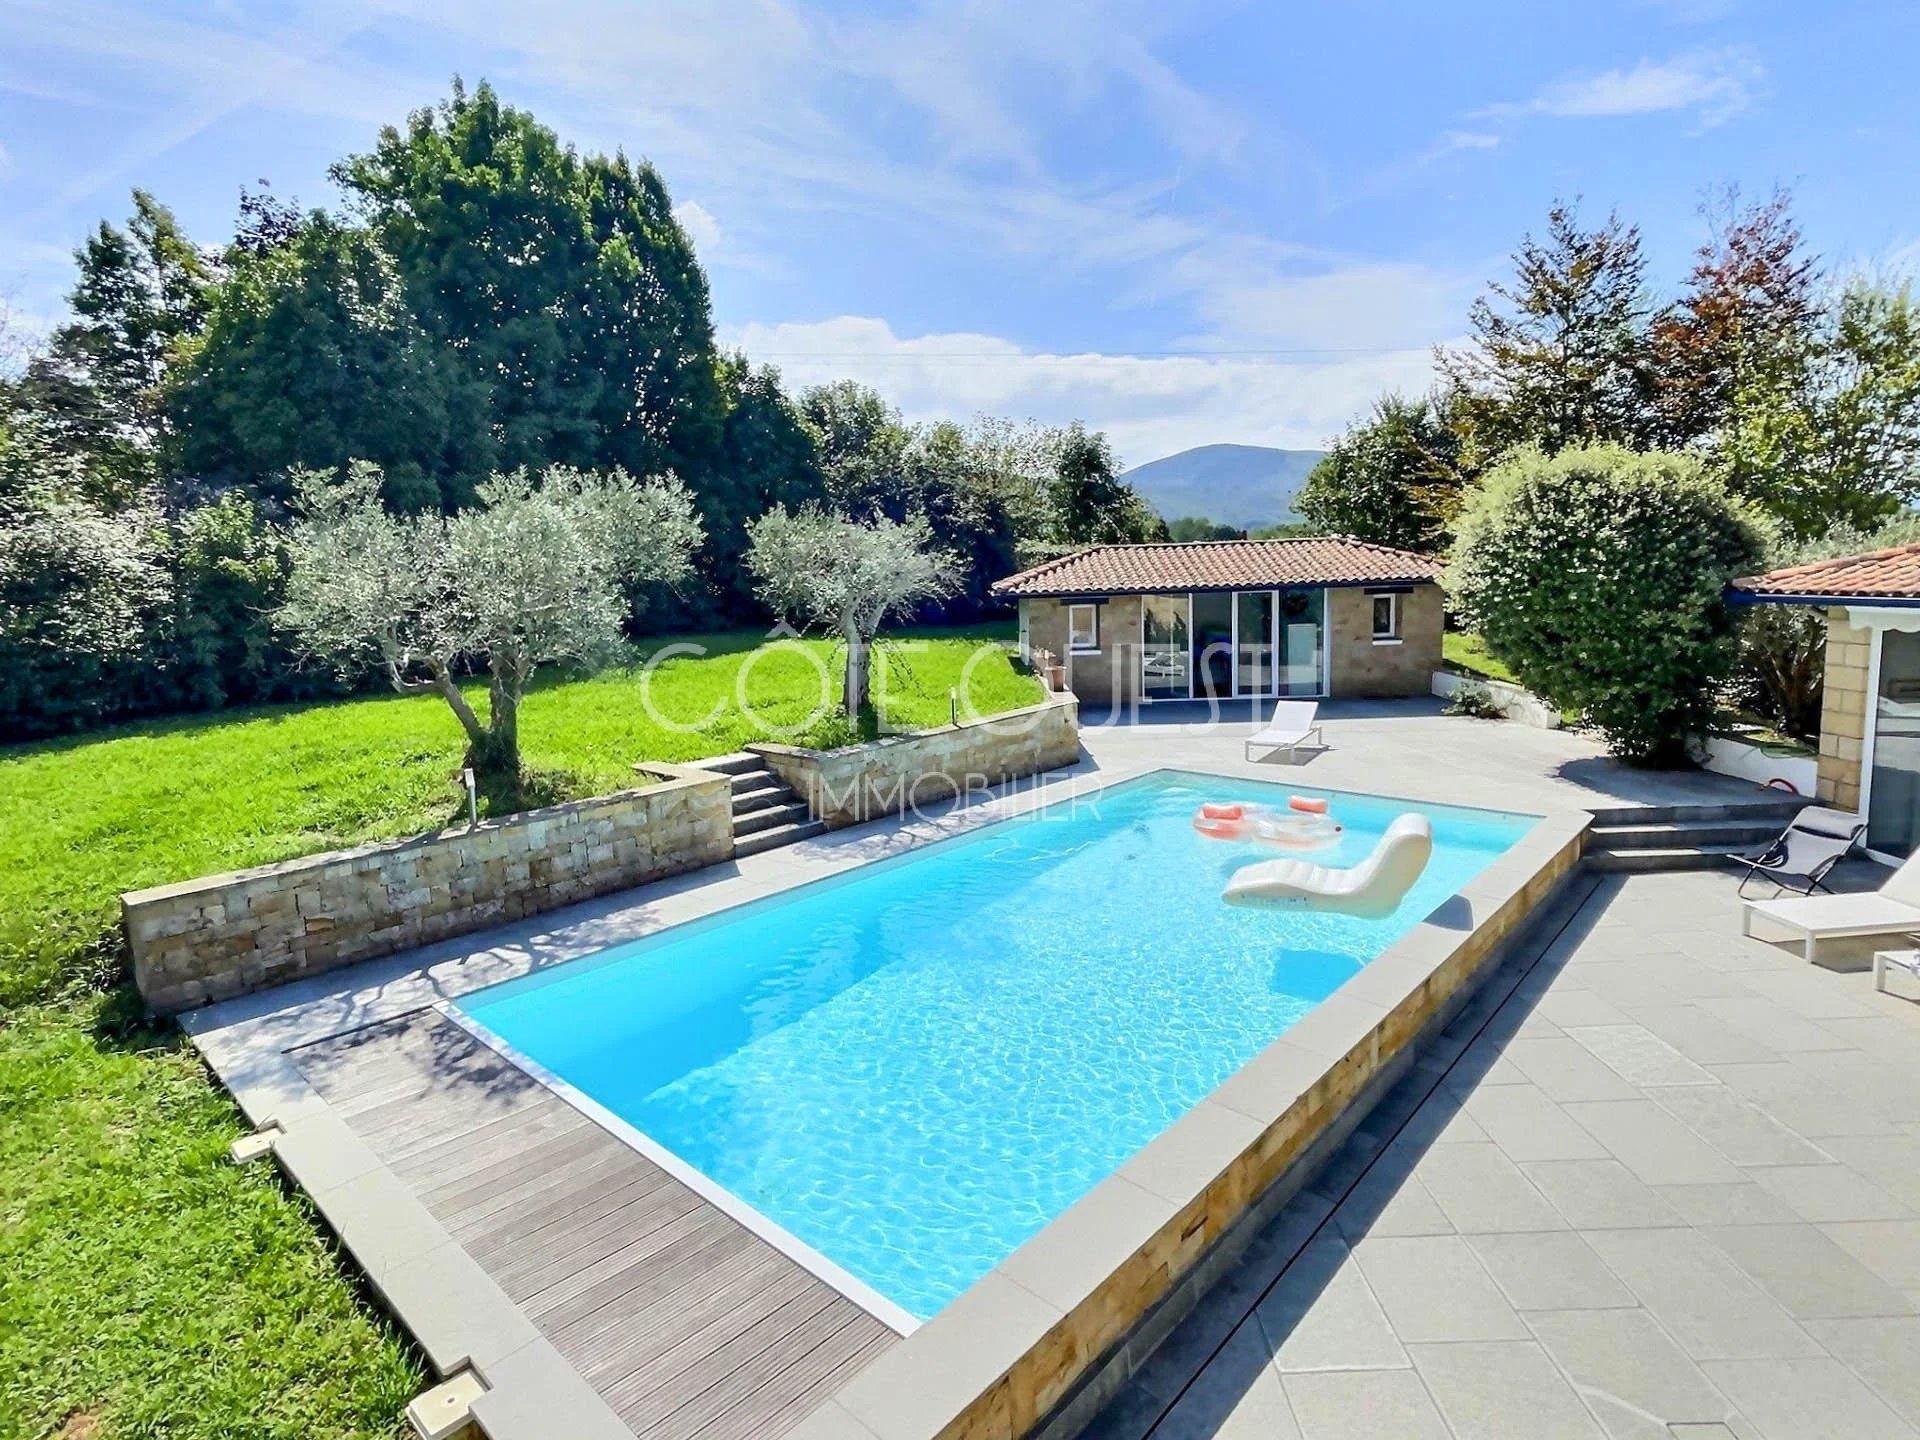 URRUGNE – A PROPERTY WITH A SWIMMING POOL